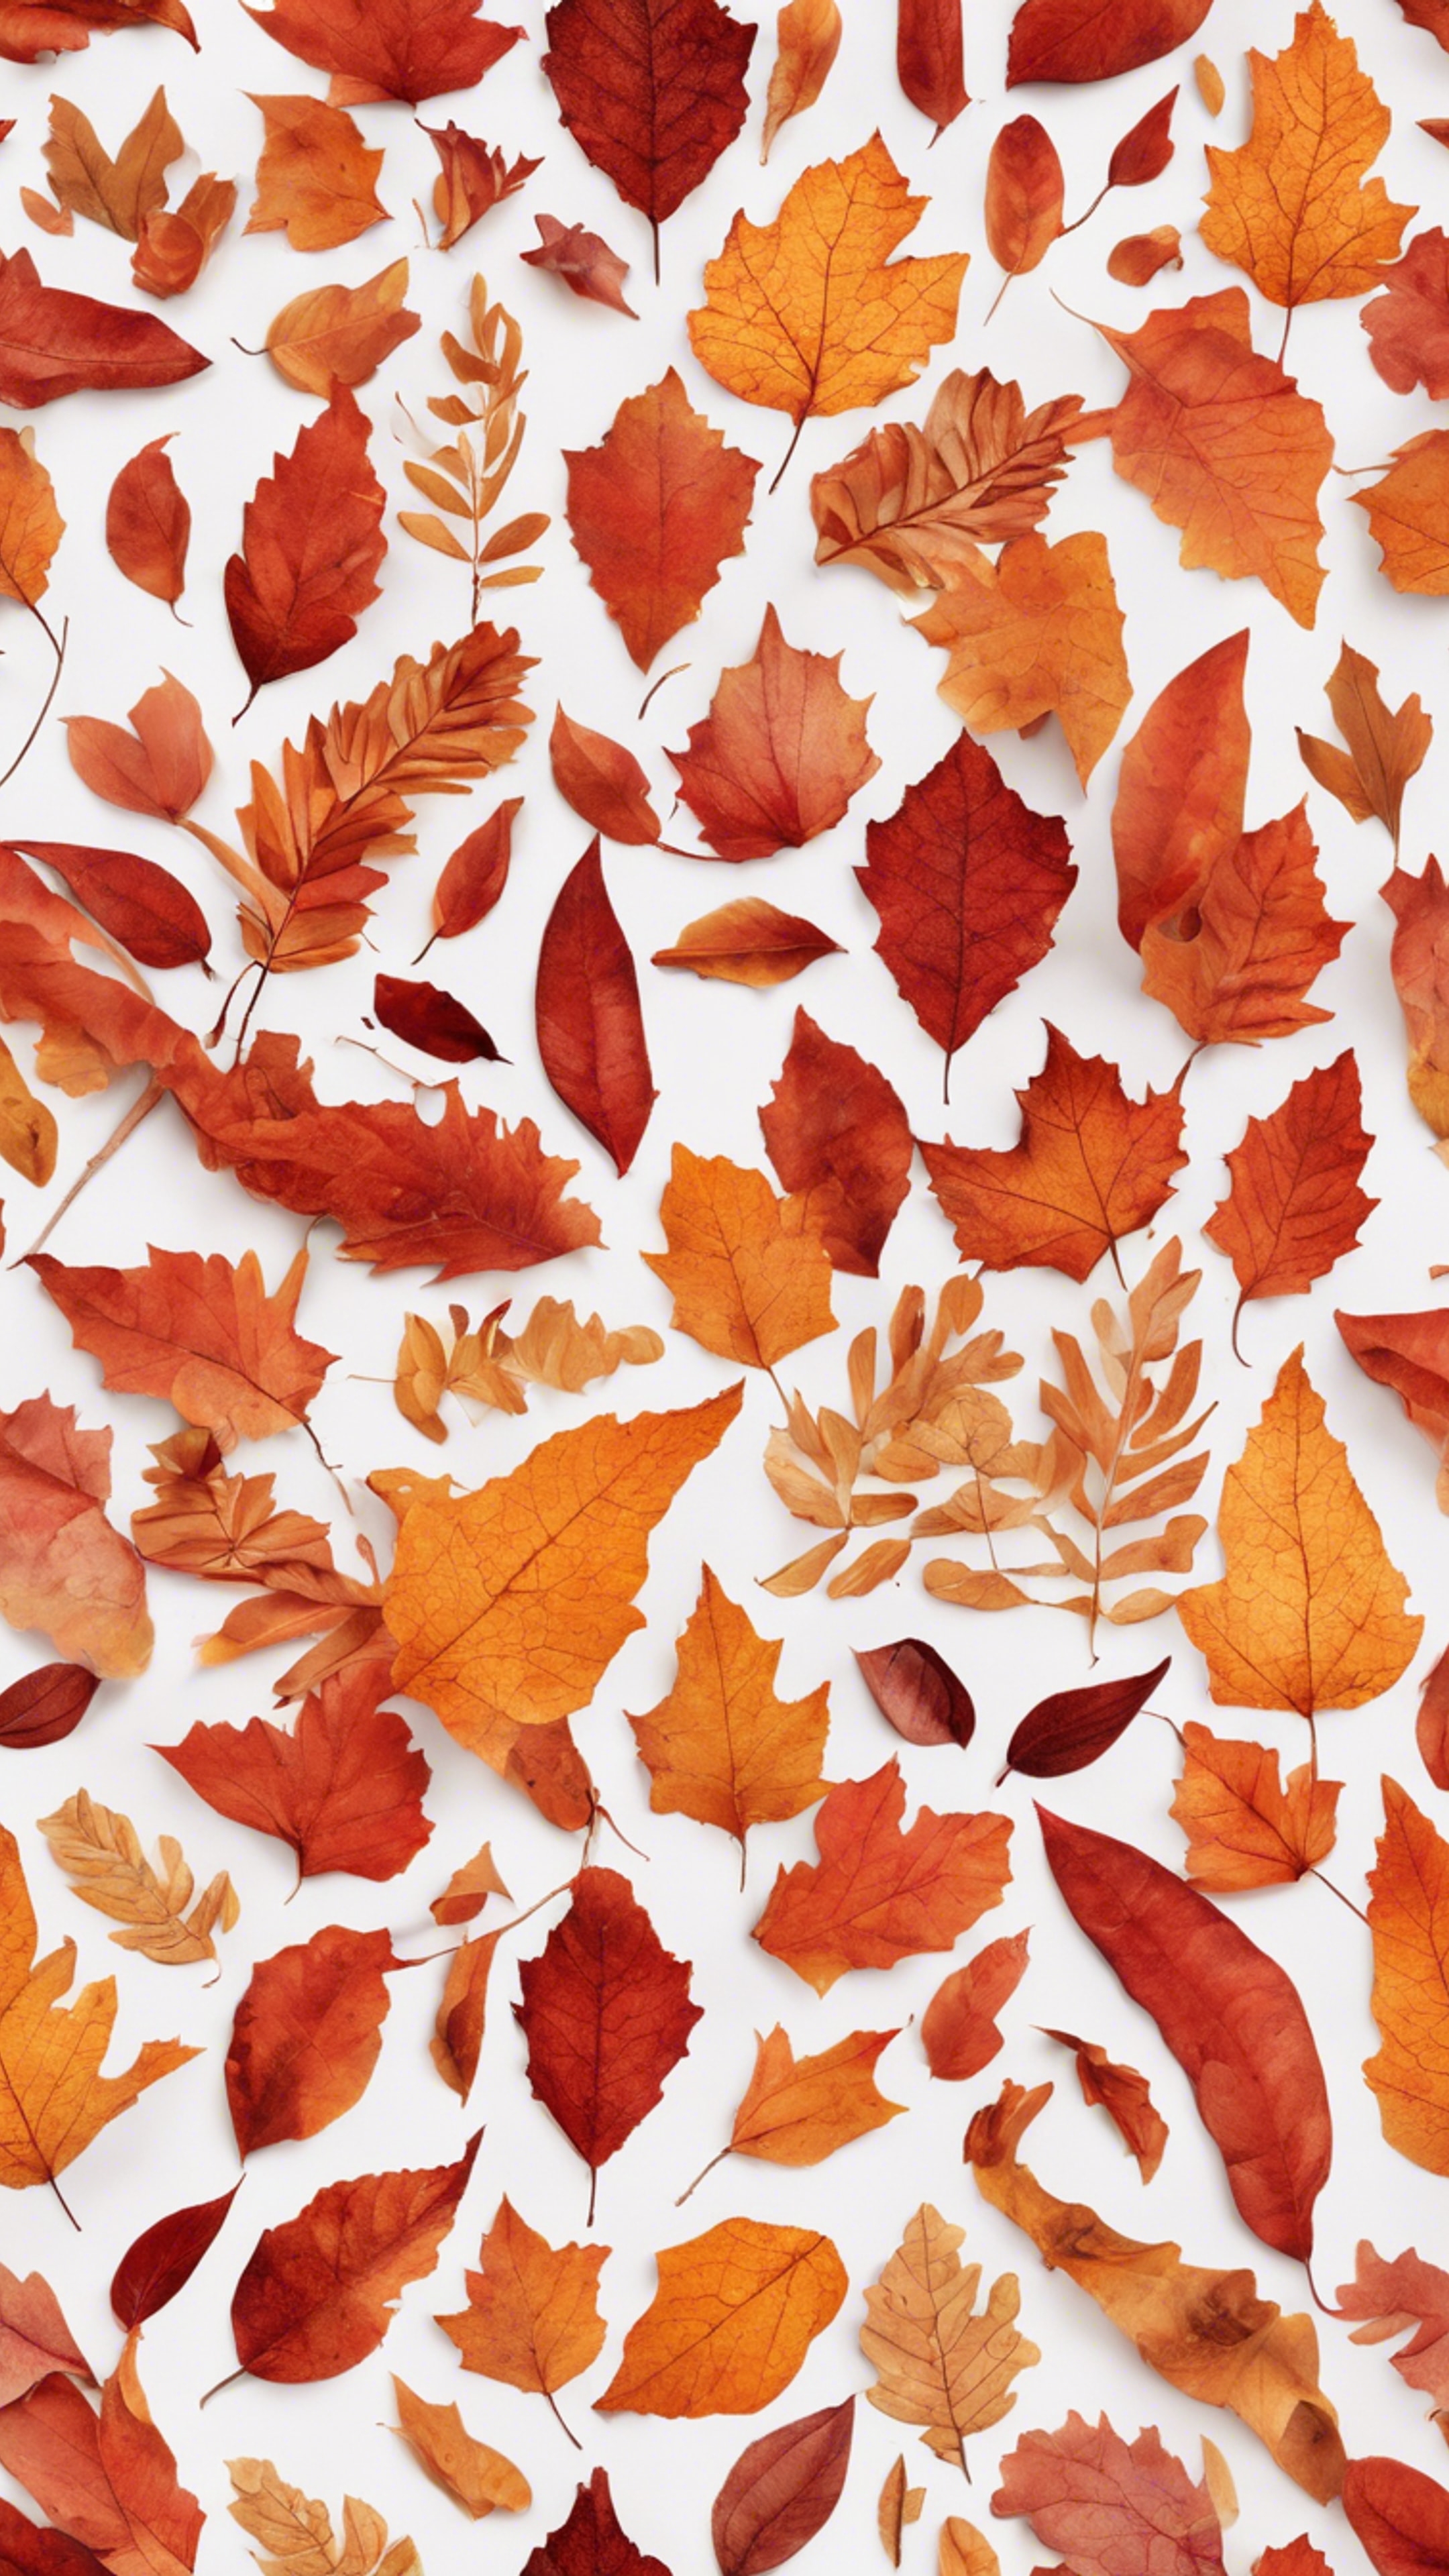 A fiery autumn pattern, reminiscent of falling leaves, in a seamless mix of red and orange. Tapet[40781a28d8554bd2886e]